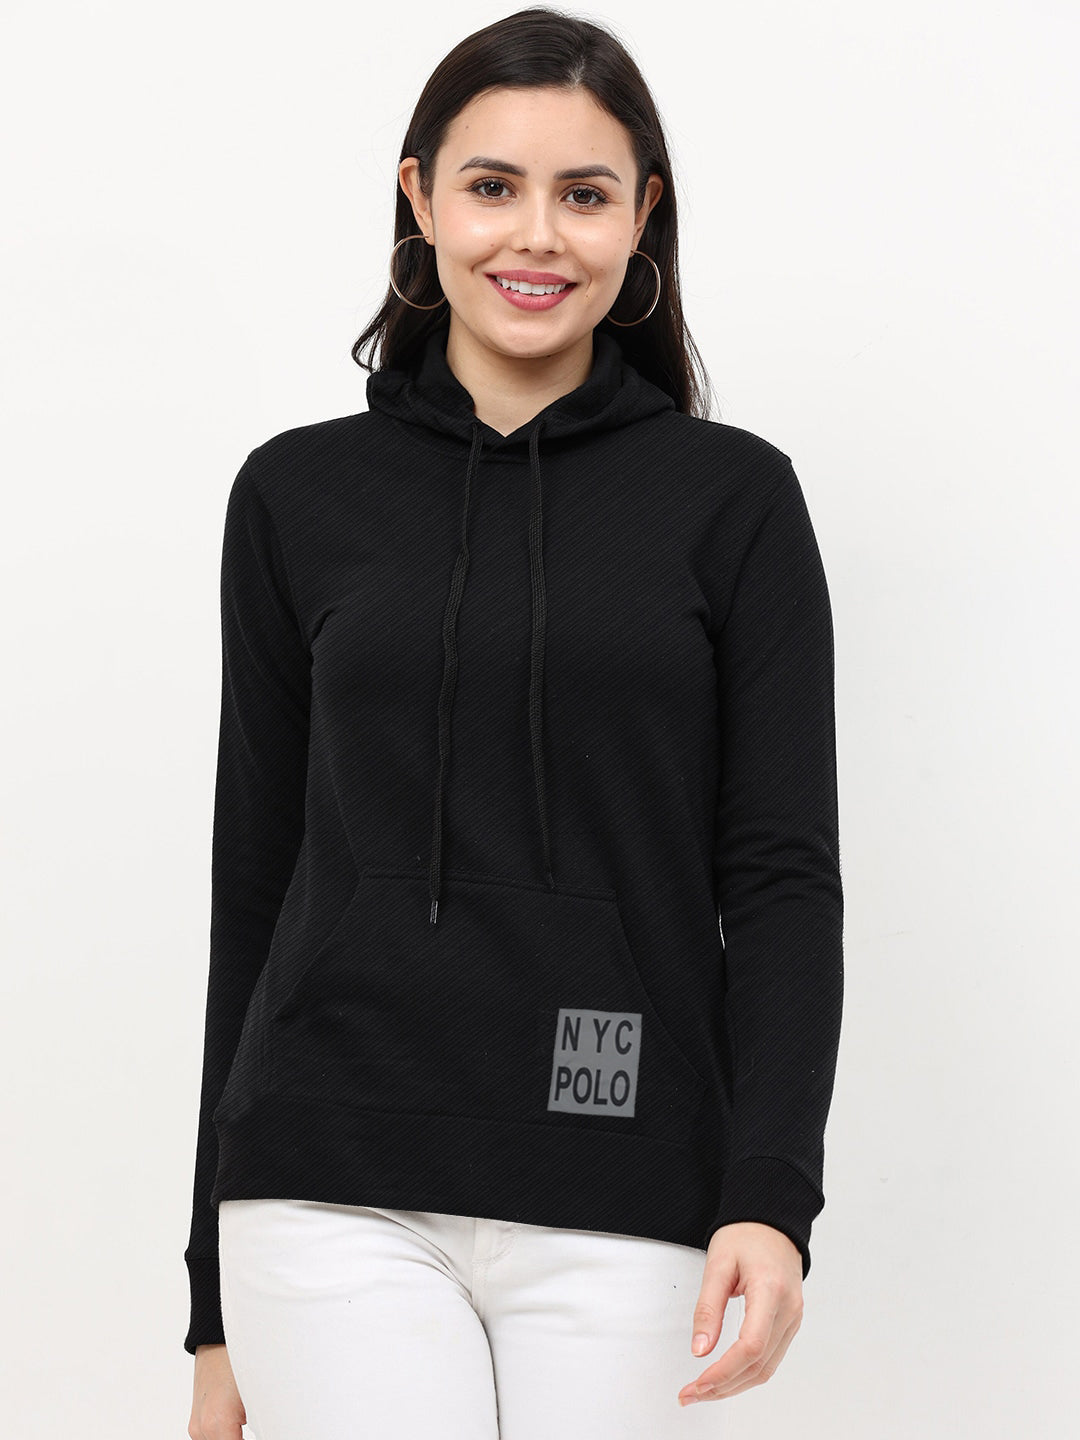 NYC Polo Terry Fleece Pullover Hoodie For Ladies-Black with Allover Lining-SP997